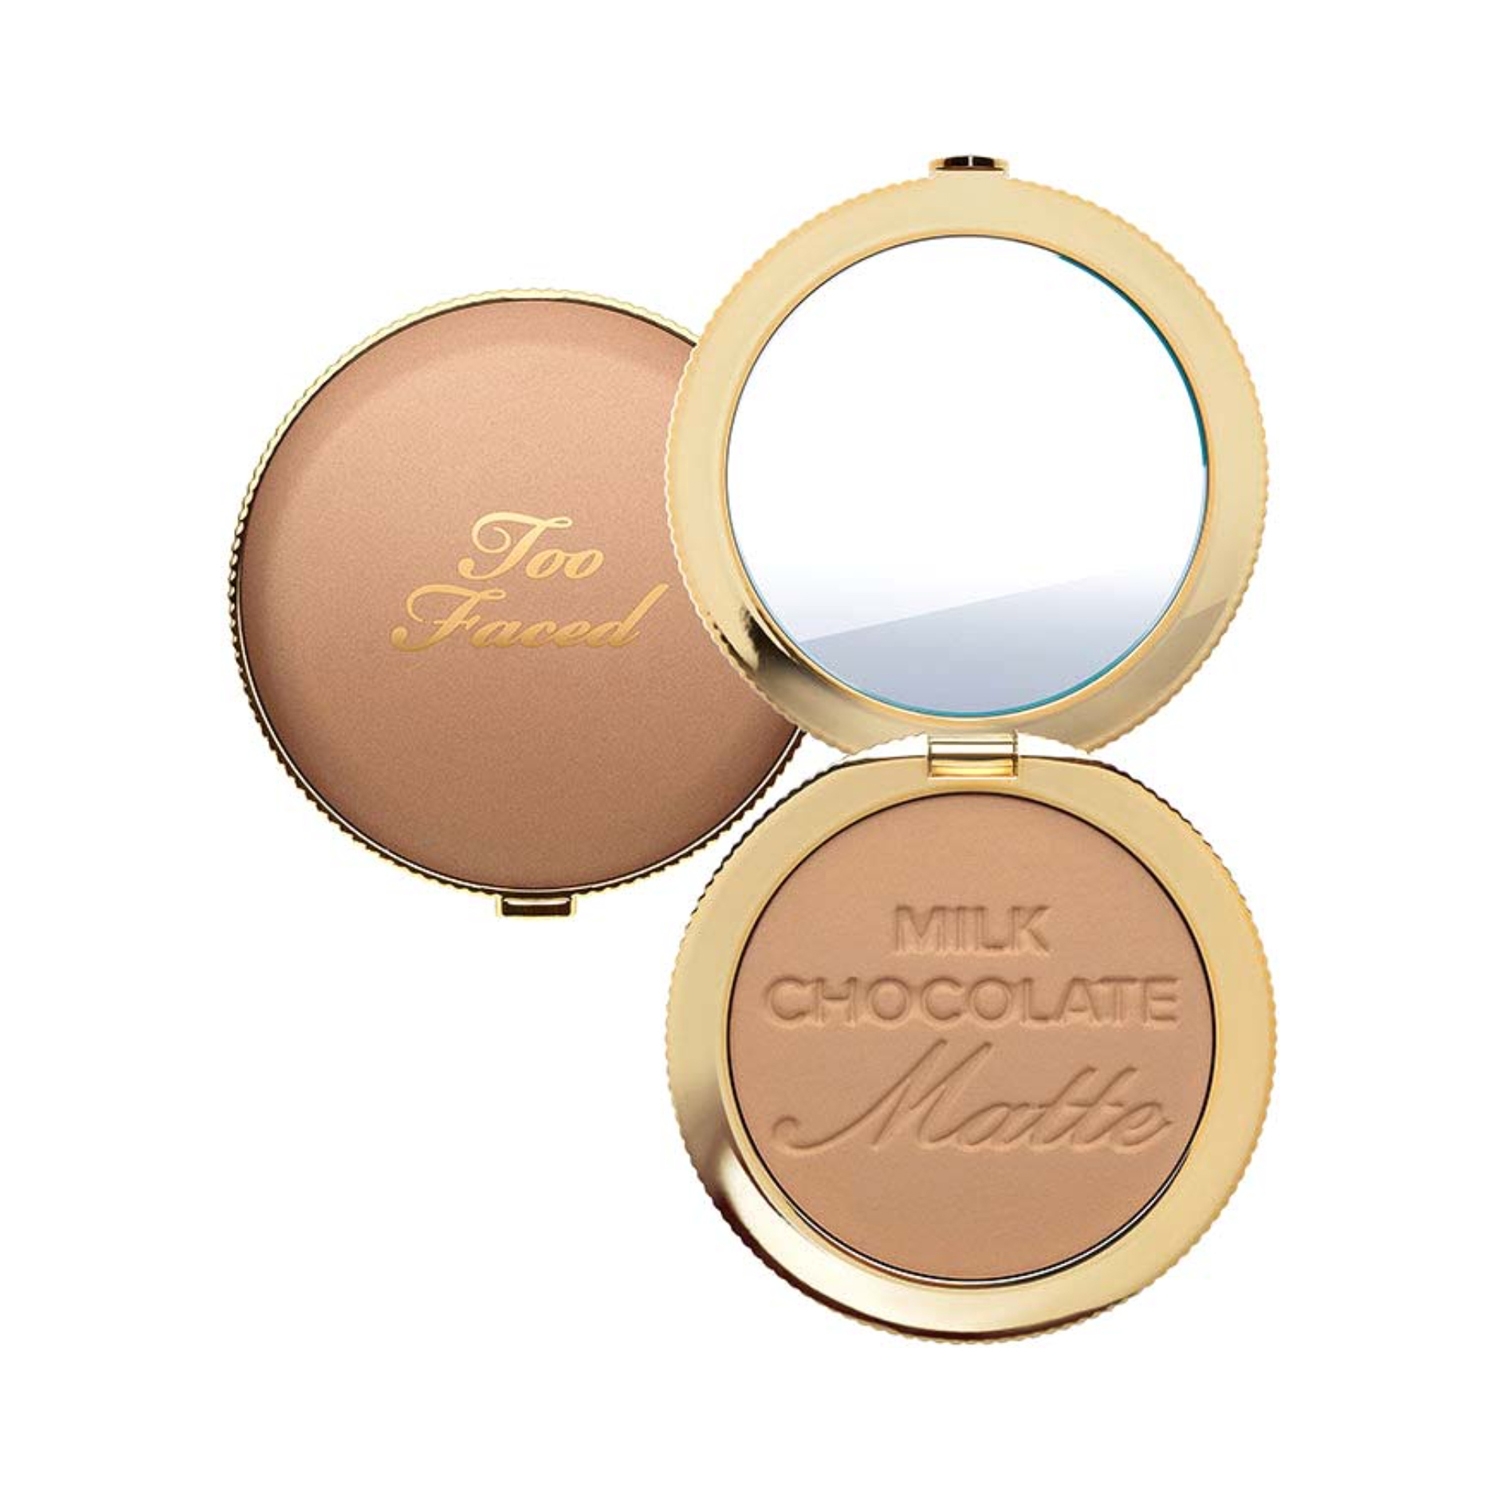 Too Faced Travel Size Soleil -